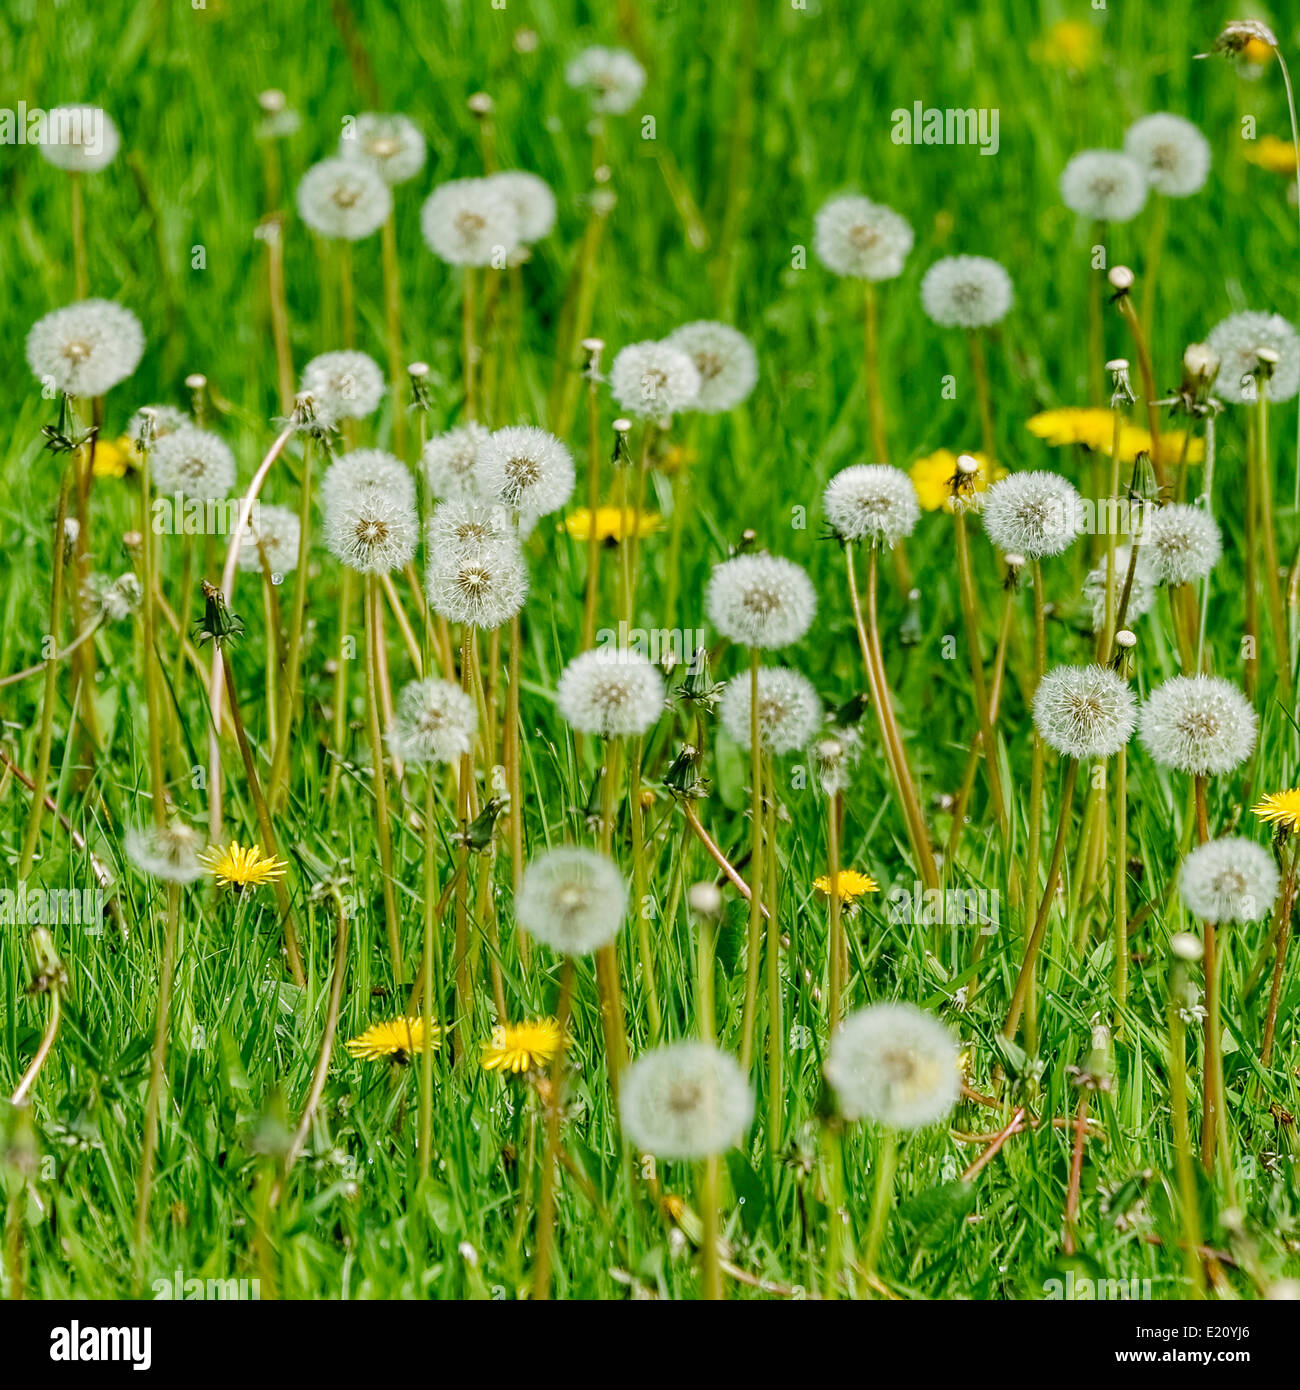 Patch of dandelions, some with blooms and some with seed heads, in a grassy English field in daylight; square orientation. Stock Photo